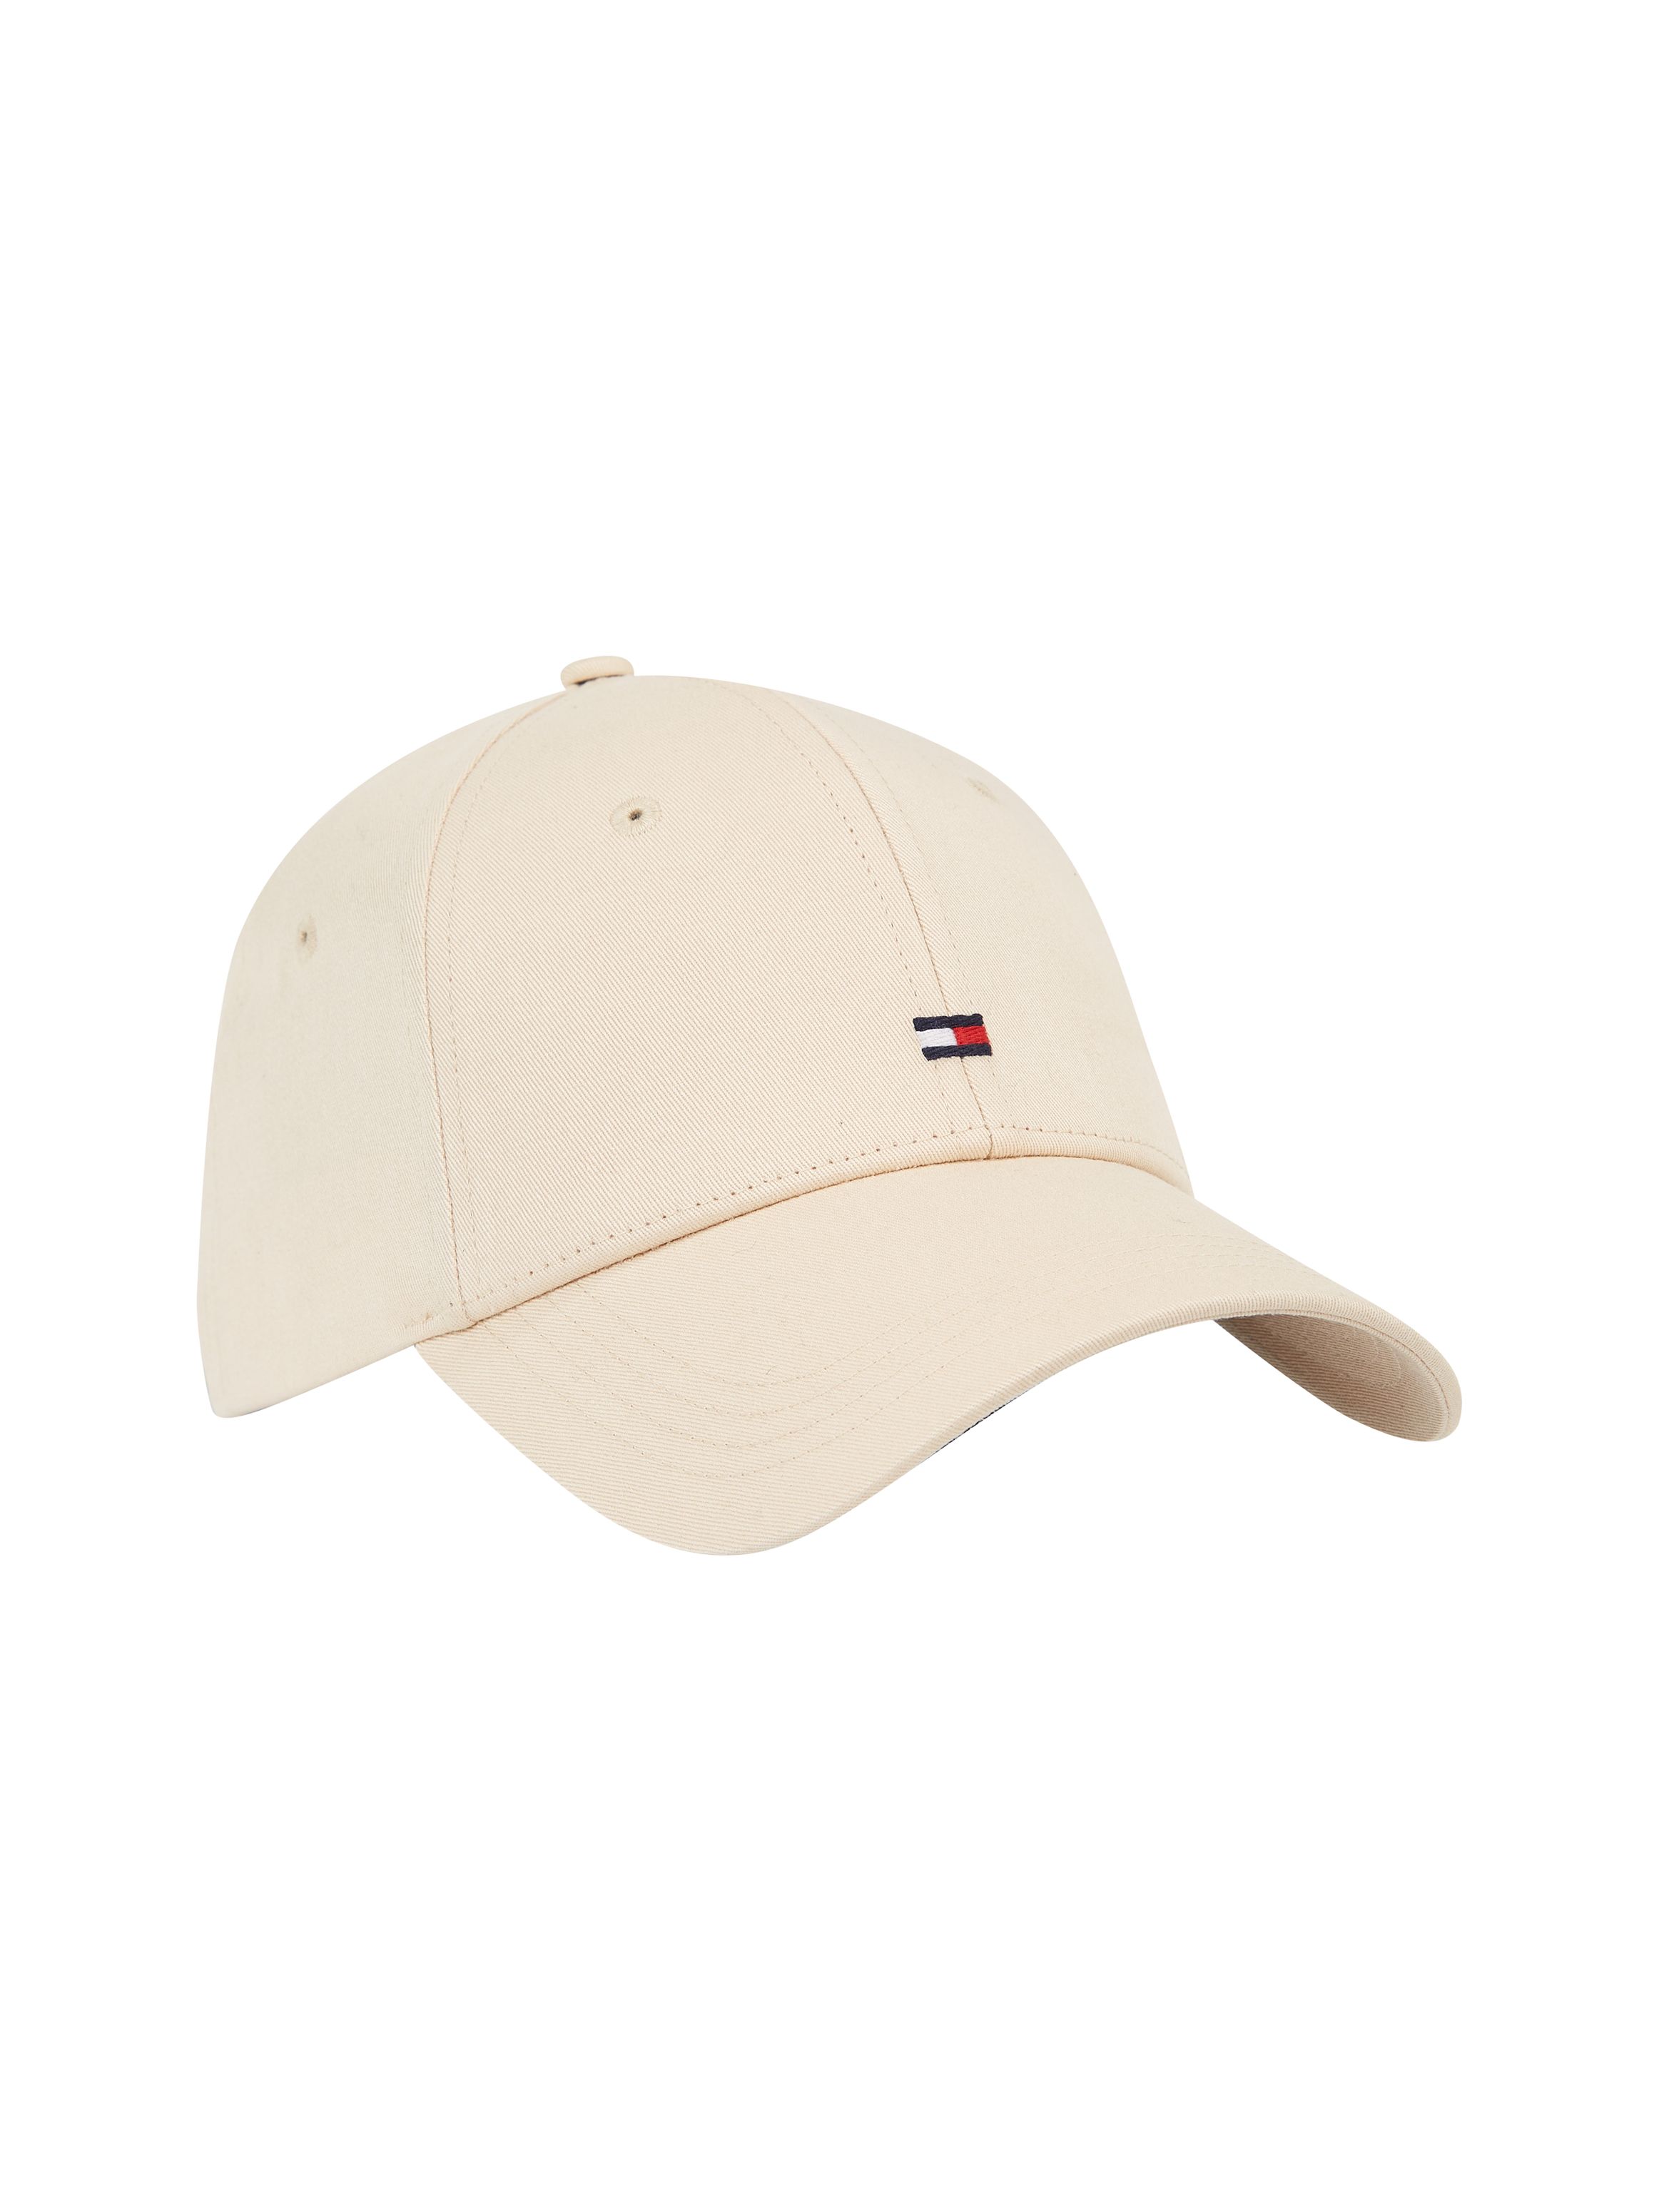 Tommy Hilfiger Embroidery Baseball Cap